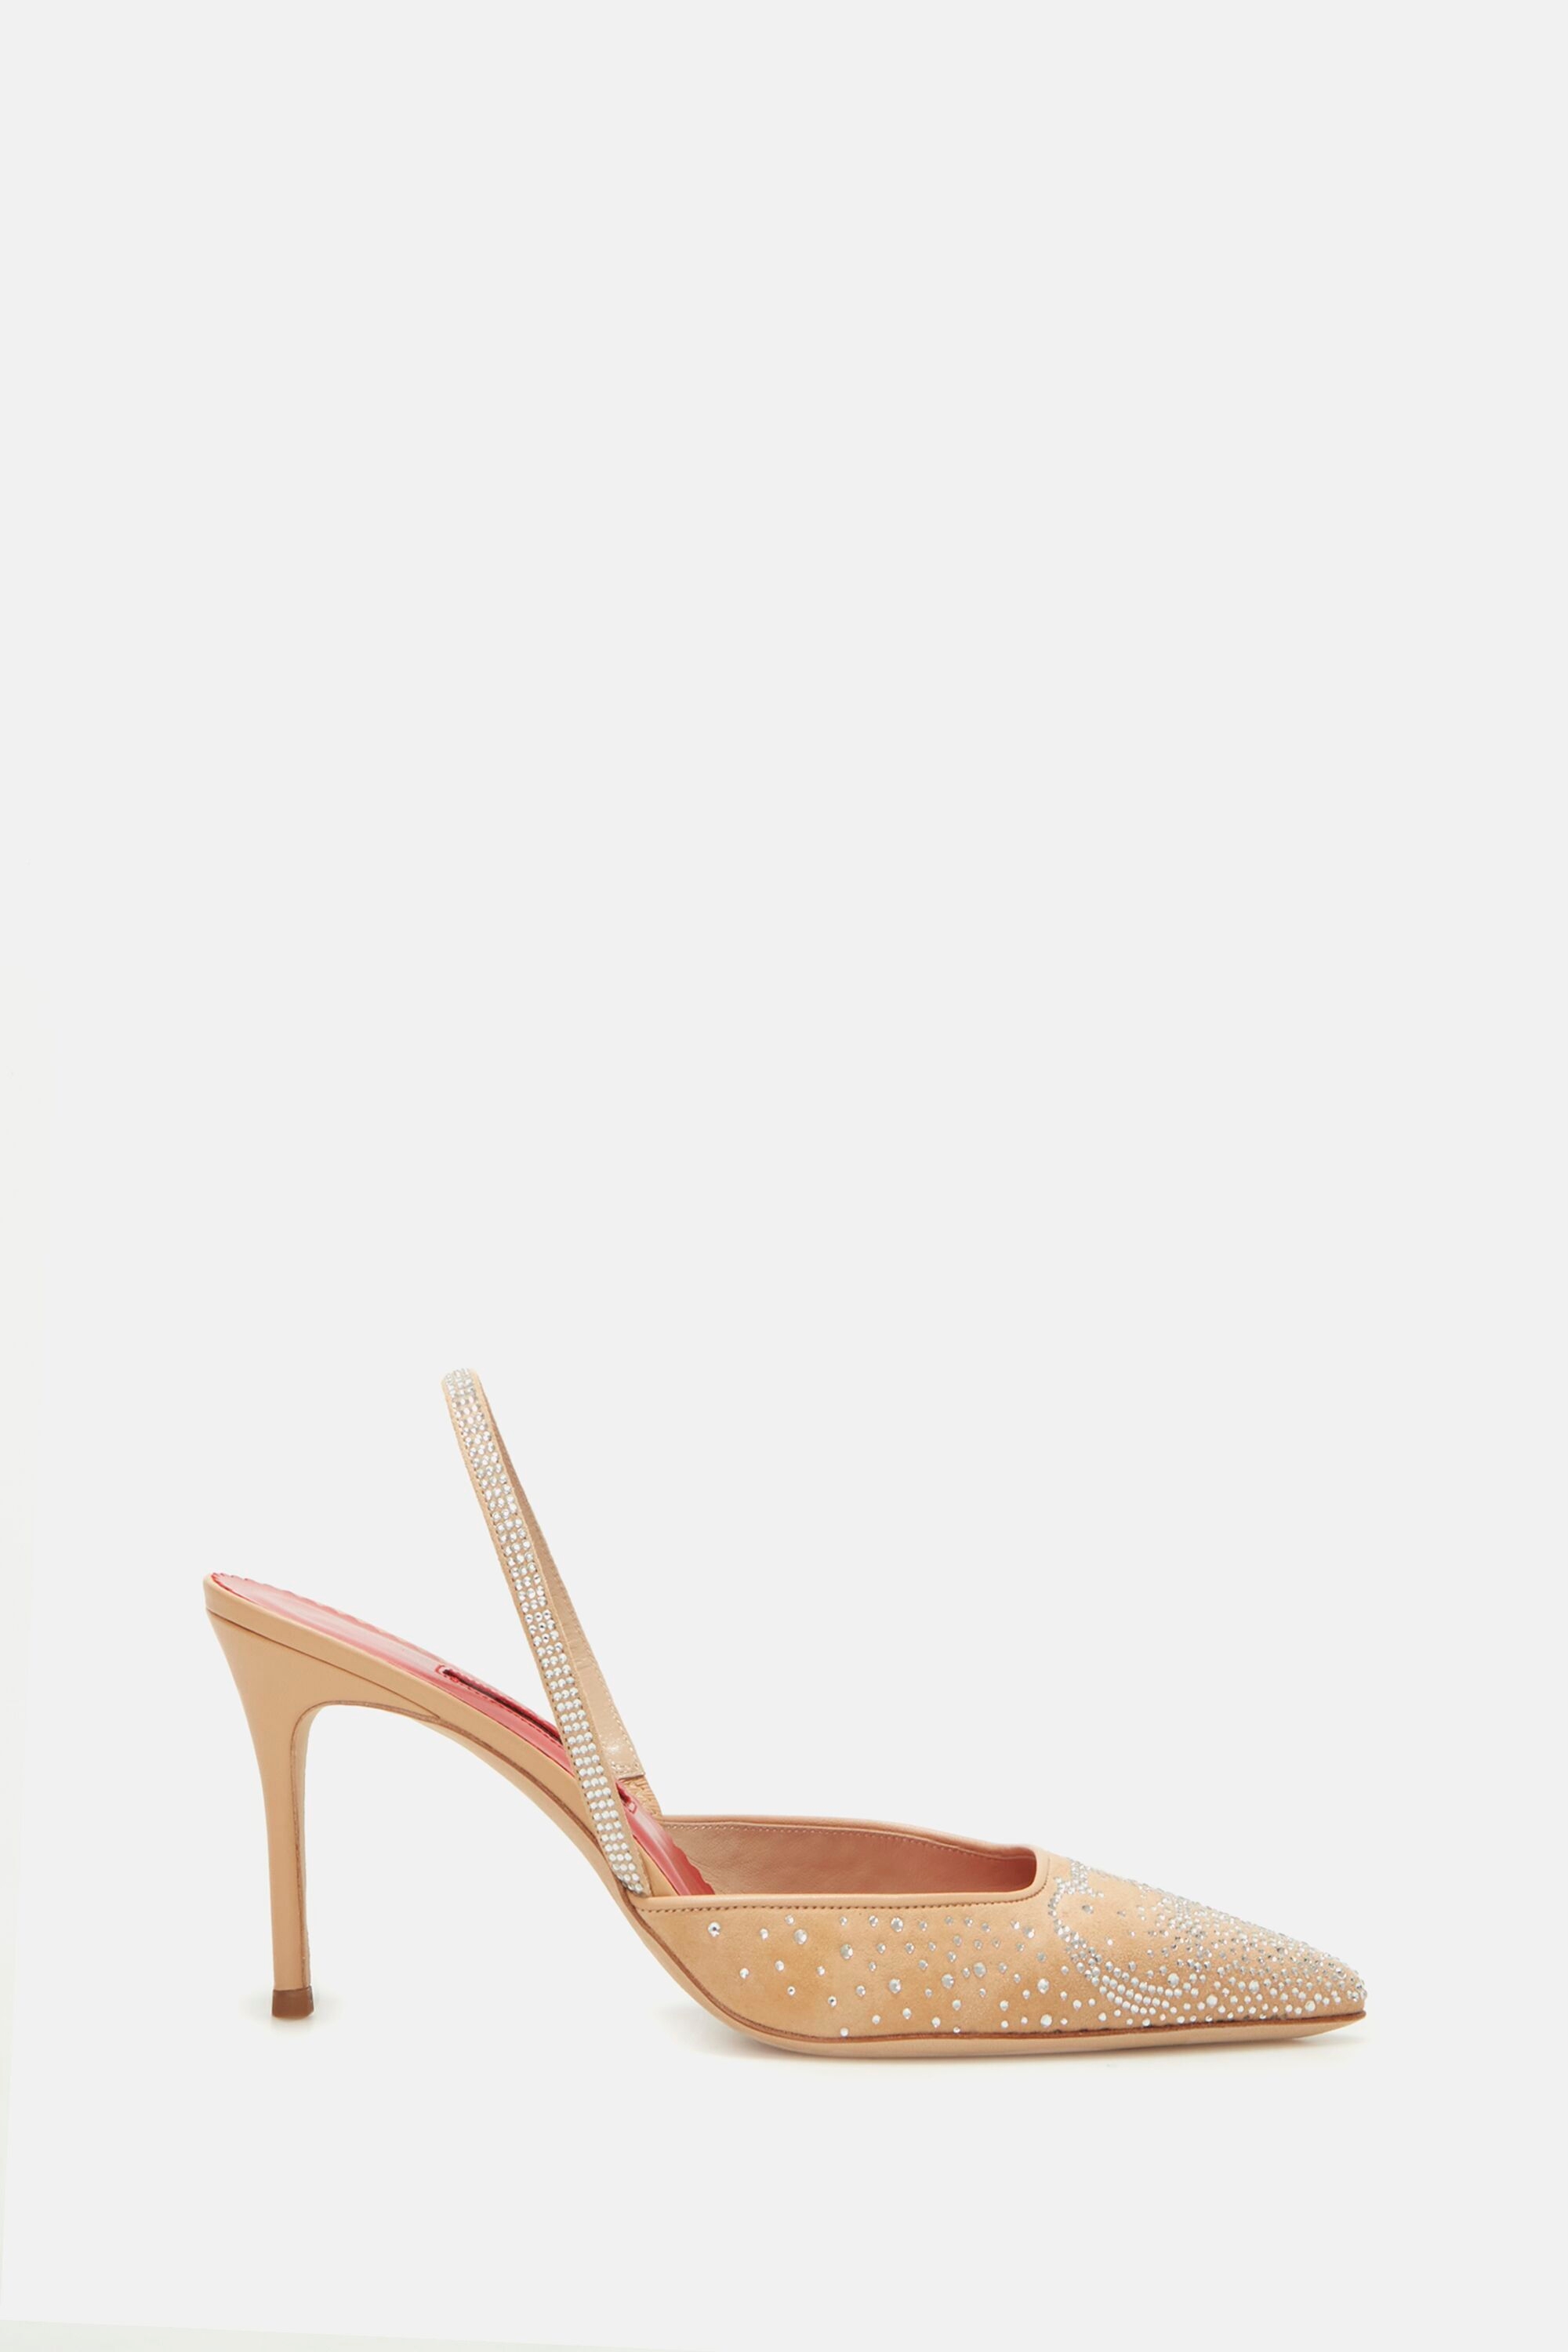 Initials Insignia 80 crystal-embellished suede slingback pumps